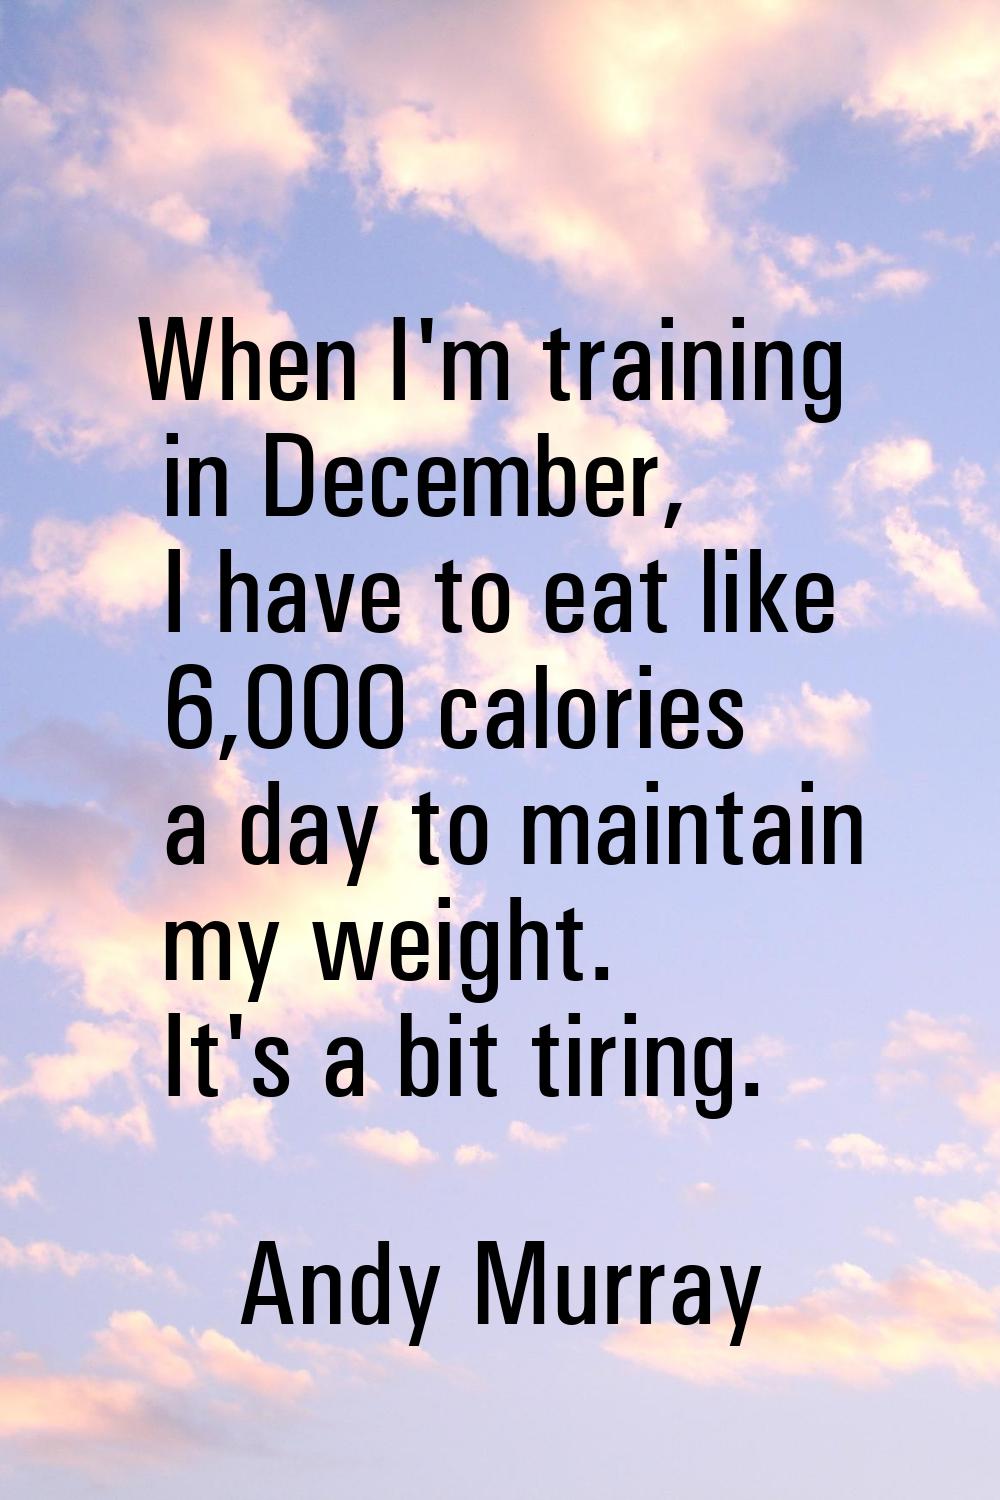 When I'm training in December, I have to eat like 6,000 calories a day to maintain my weight. It's 